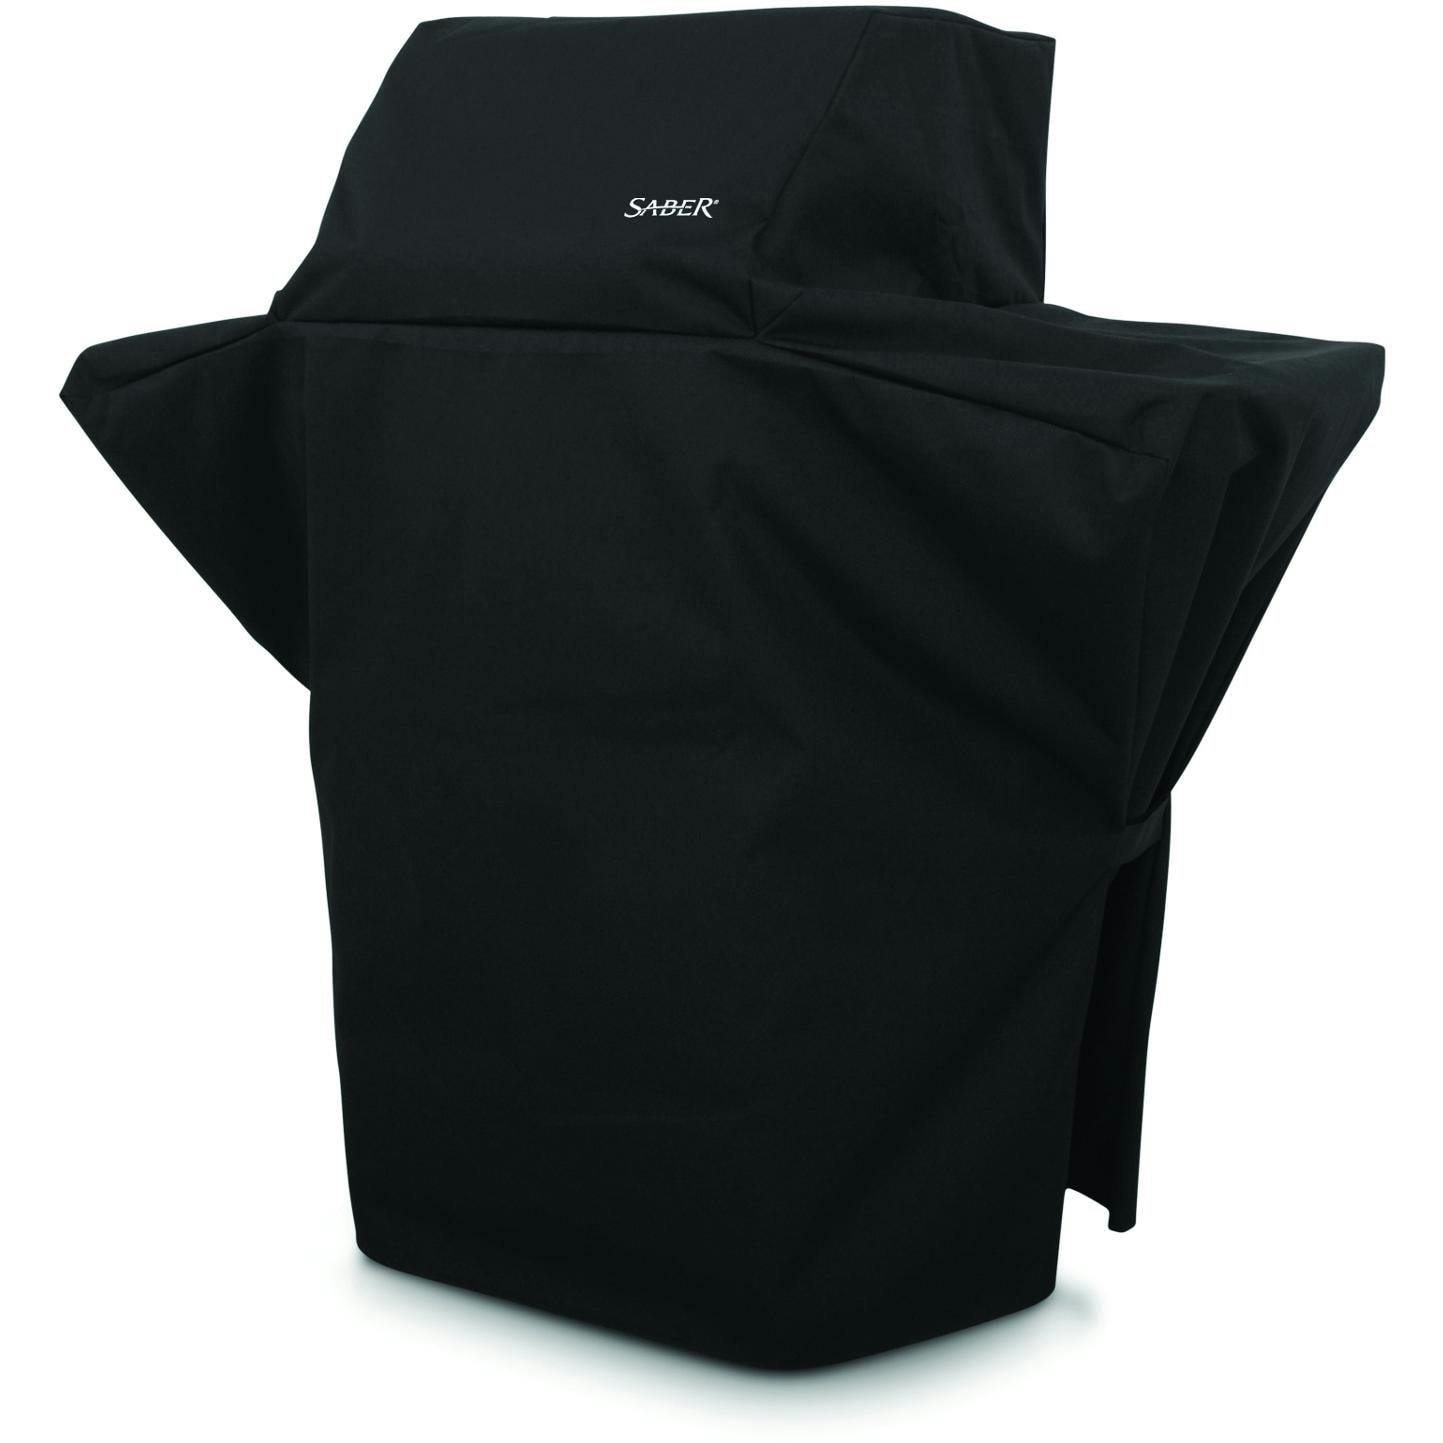 SABER 330 Freestanding Grill Cover